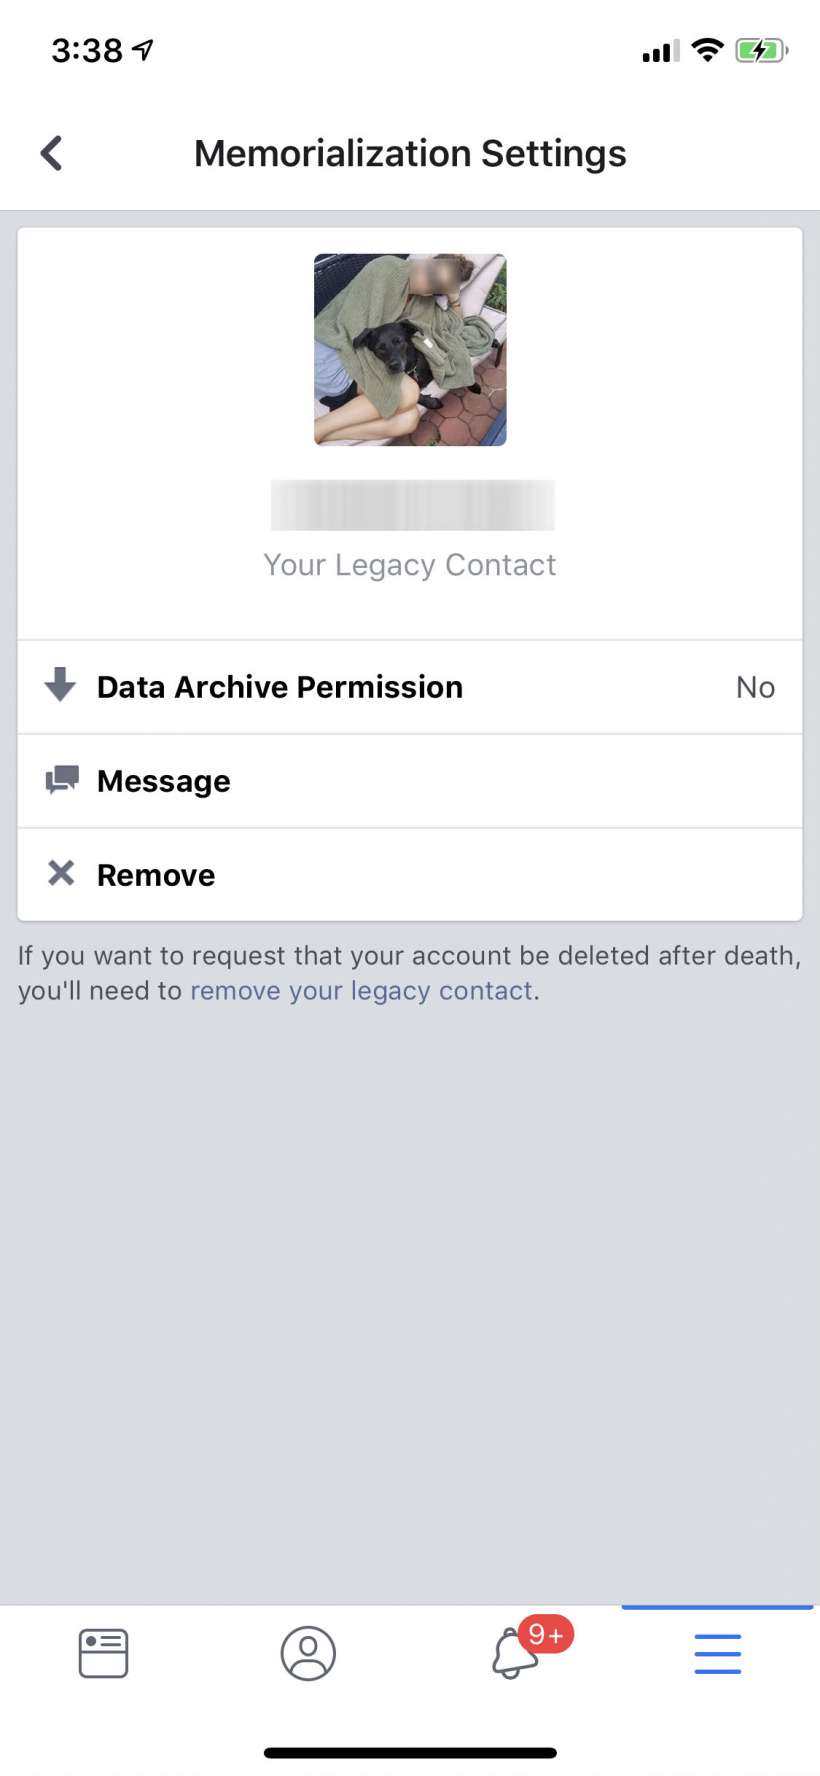 How to add a legacy contact and have your Facebook account deleted after you die.